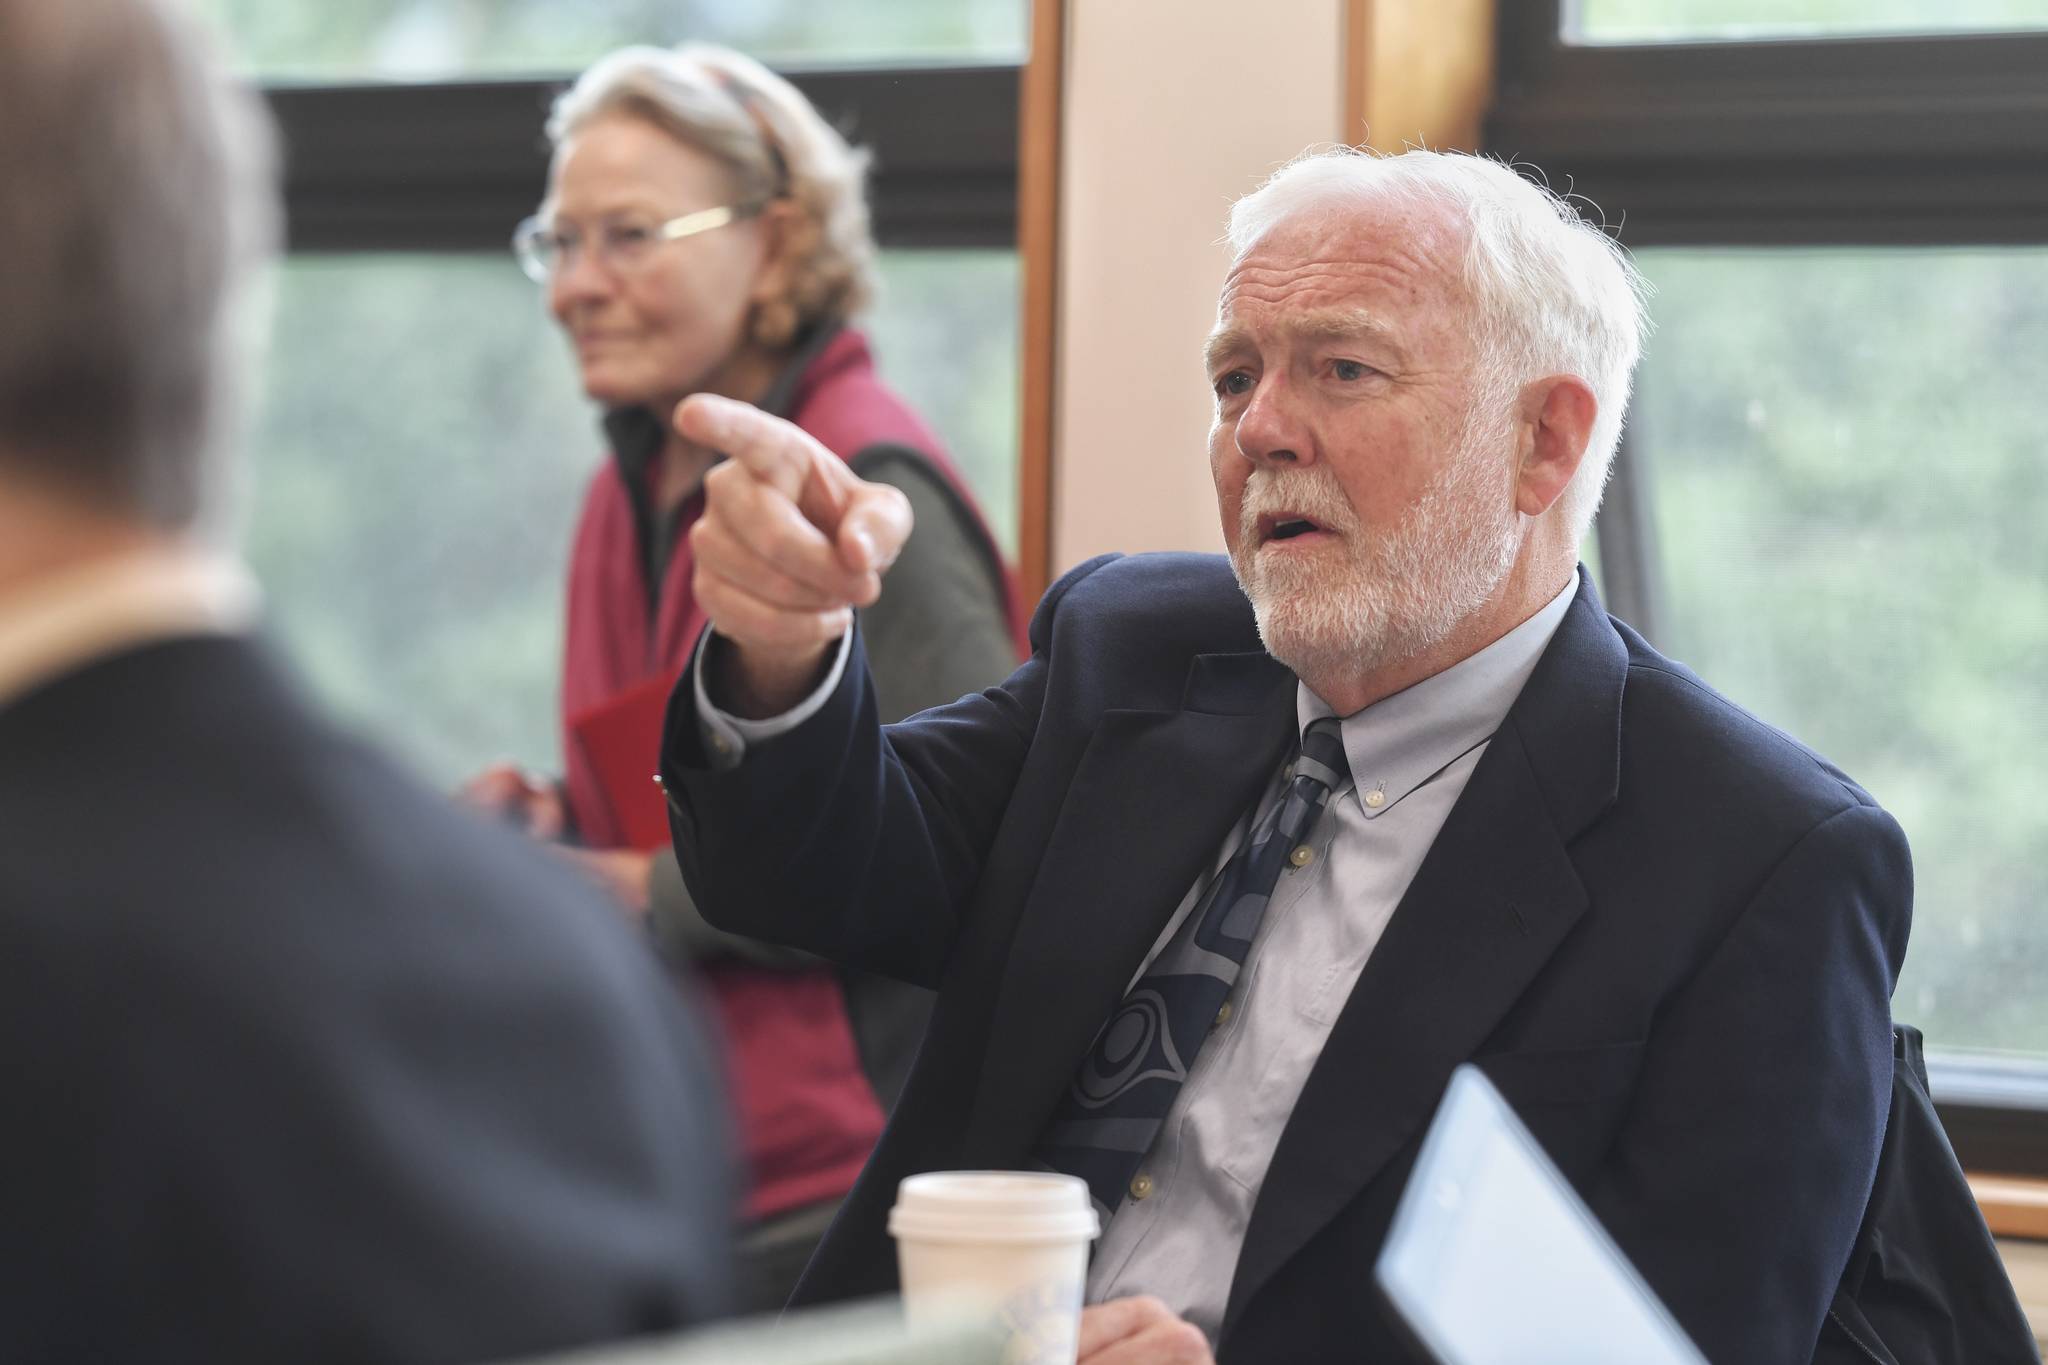 Dr. Richard Caulfield, Chancellor at the University of Alaska Southeast, watches an online meeting being held at UA campuses around the state on Gov. Mike Dunleavy’s budget cuts on Monday, July 15, 2019. (Michael Penn | Juneau Empire)